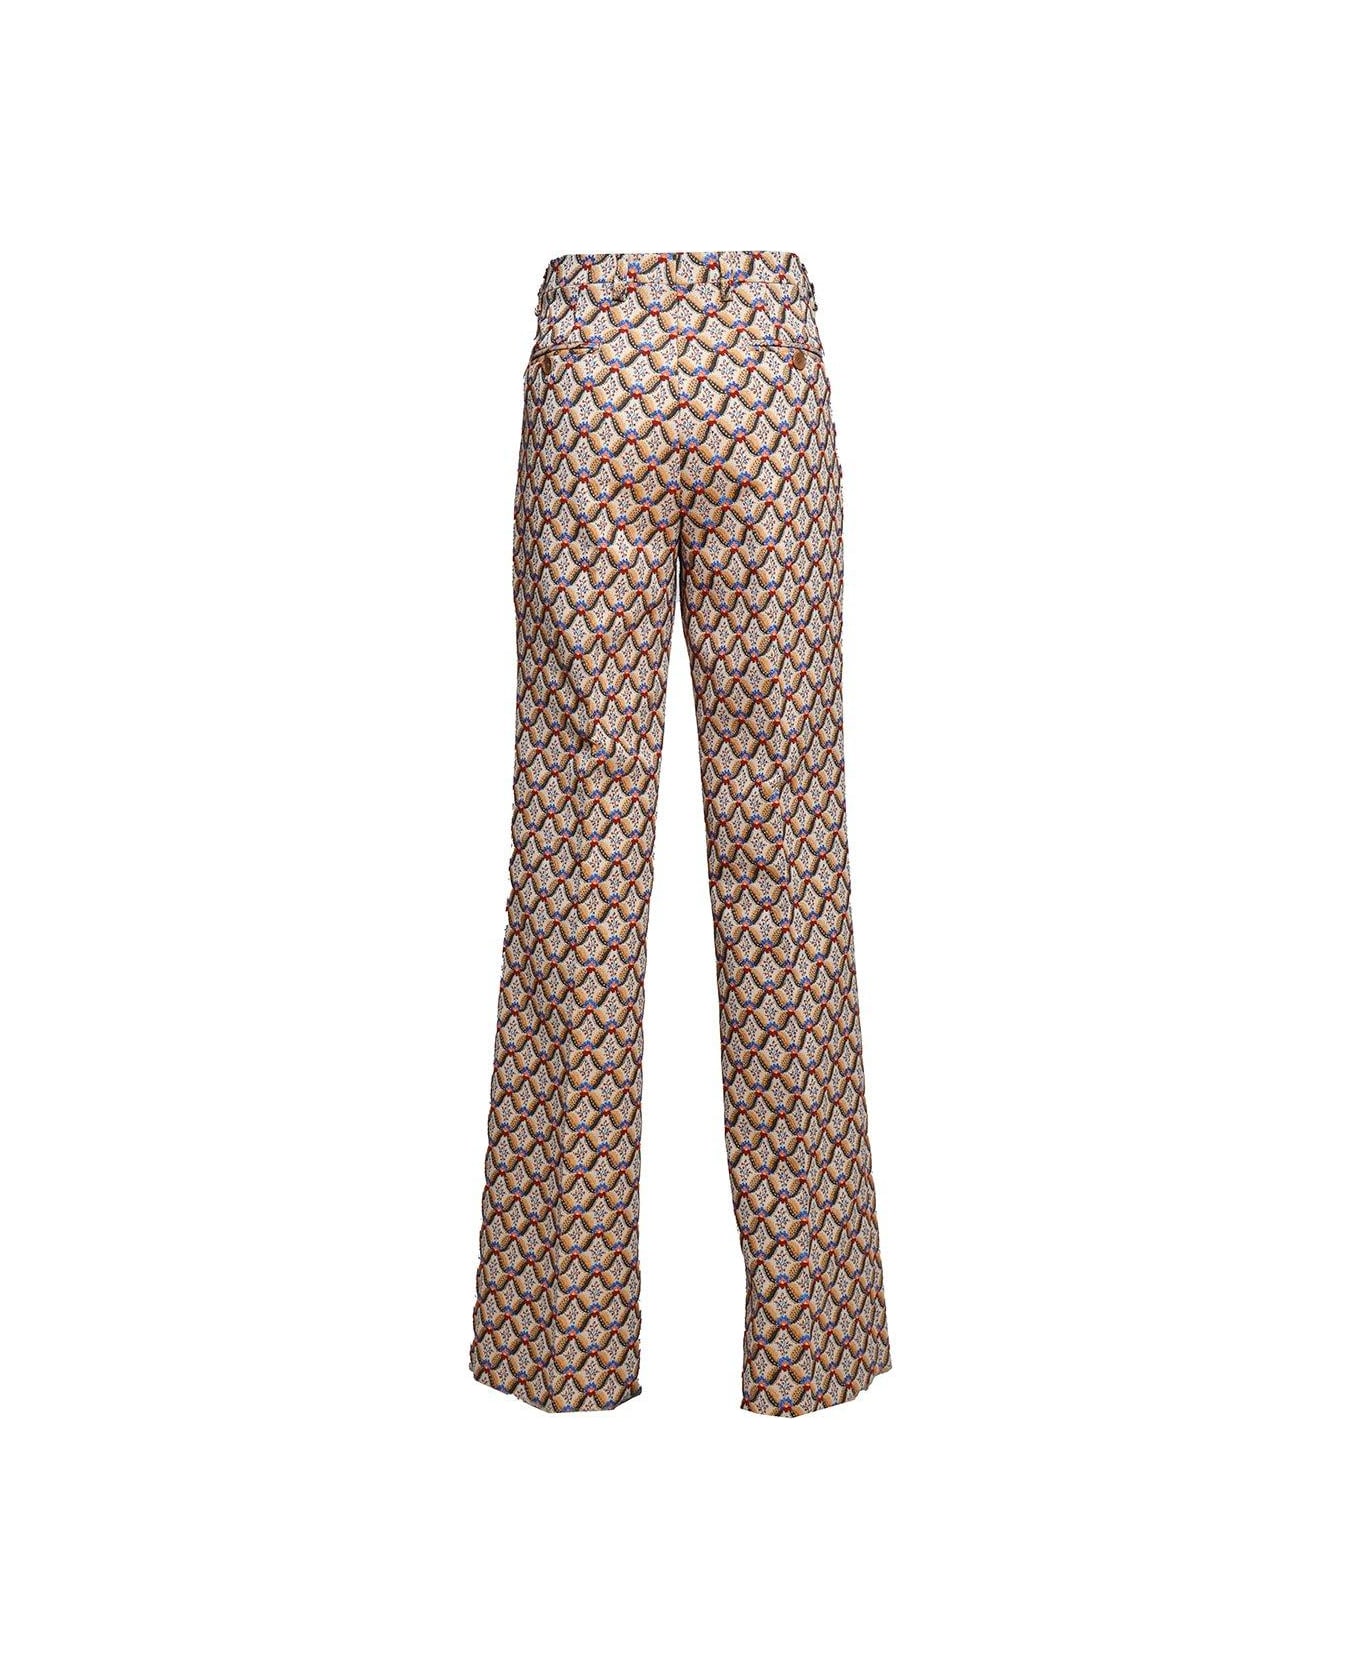 Etro Allover Floral Printed Straight-leg Trousers - Multicolour ボトムス